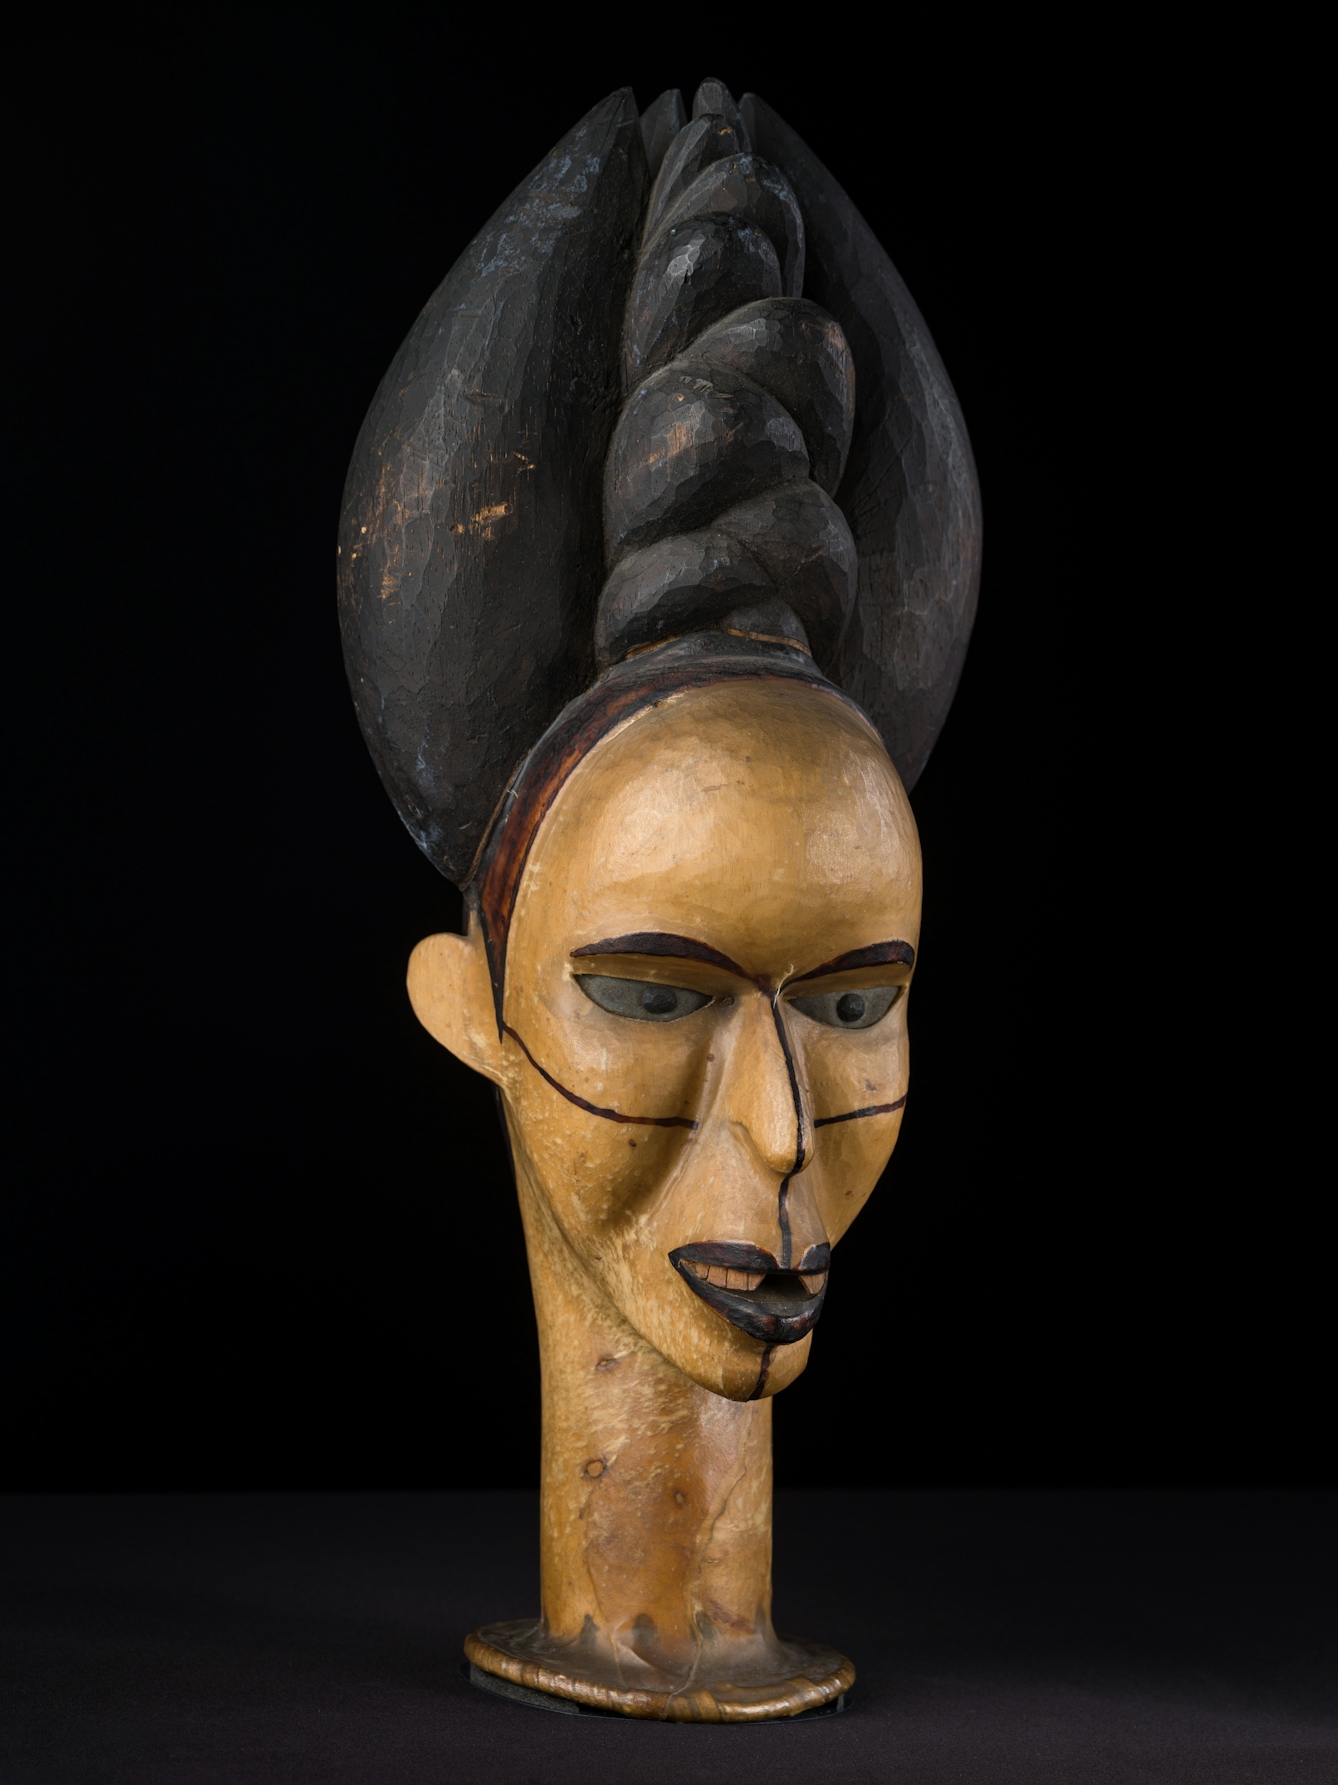 Photograph of the carved wooden head of a woman against a black background. On the woman's head is an elaborate headdress. Across her face thin black lines are drawn from the top of her nose to her chin and from ear to ear across her cheeks.